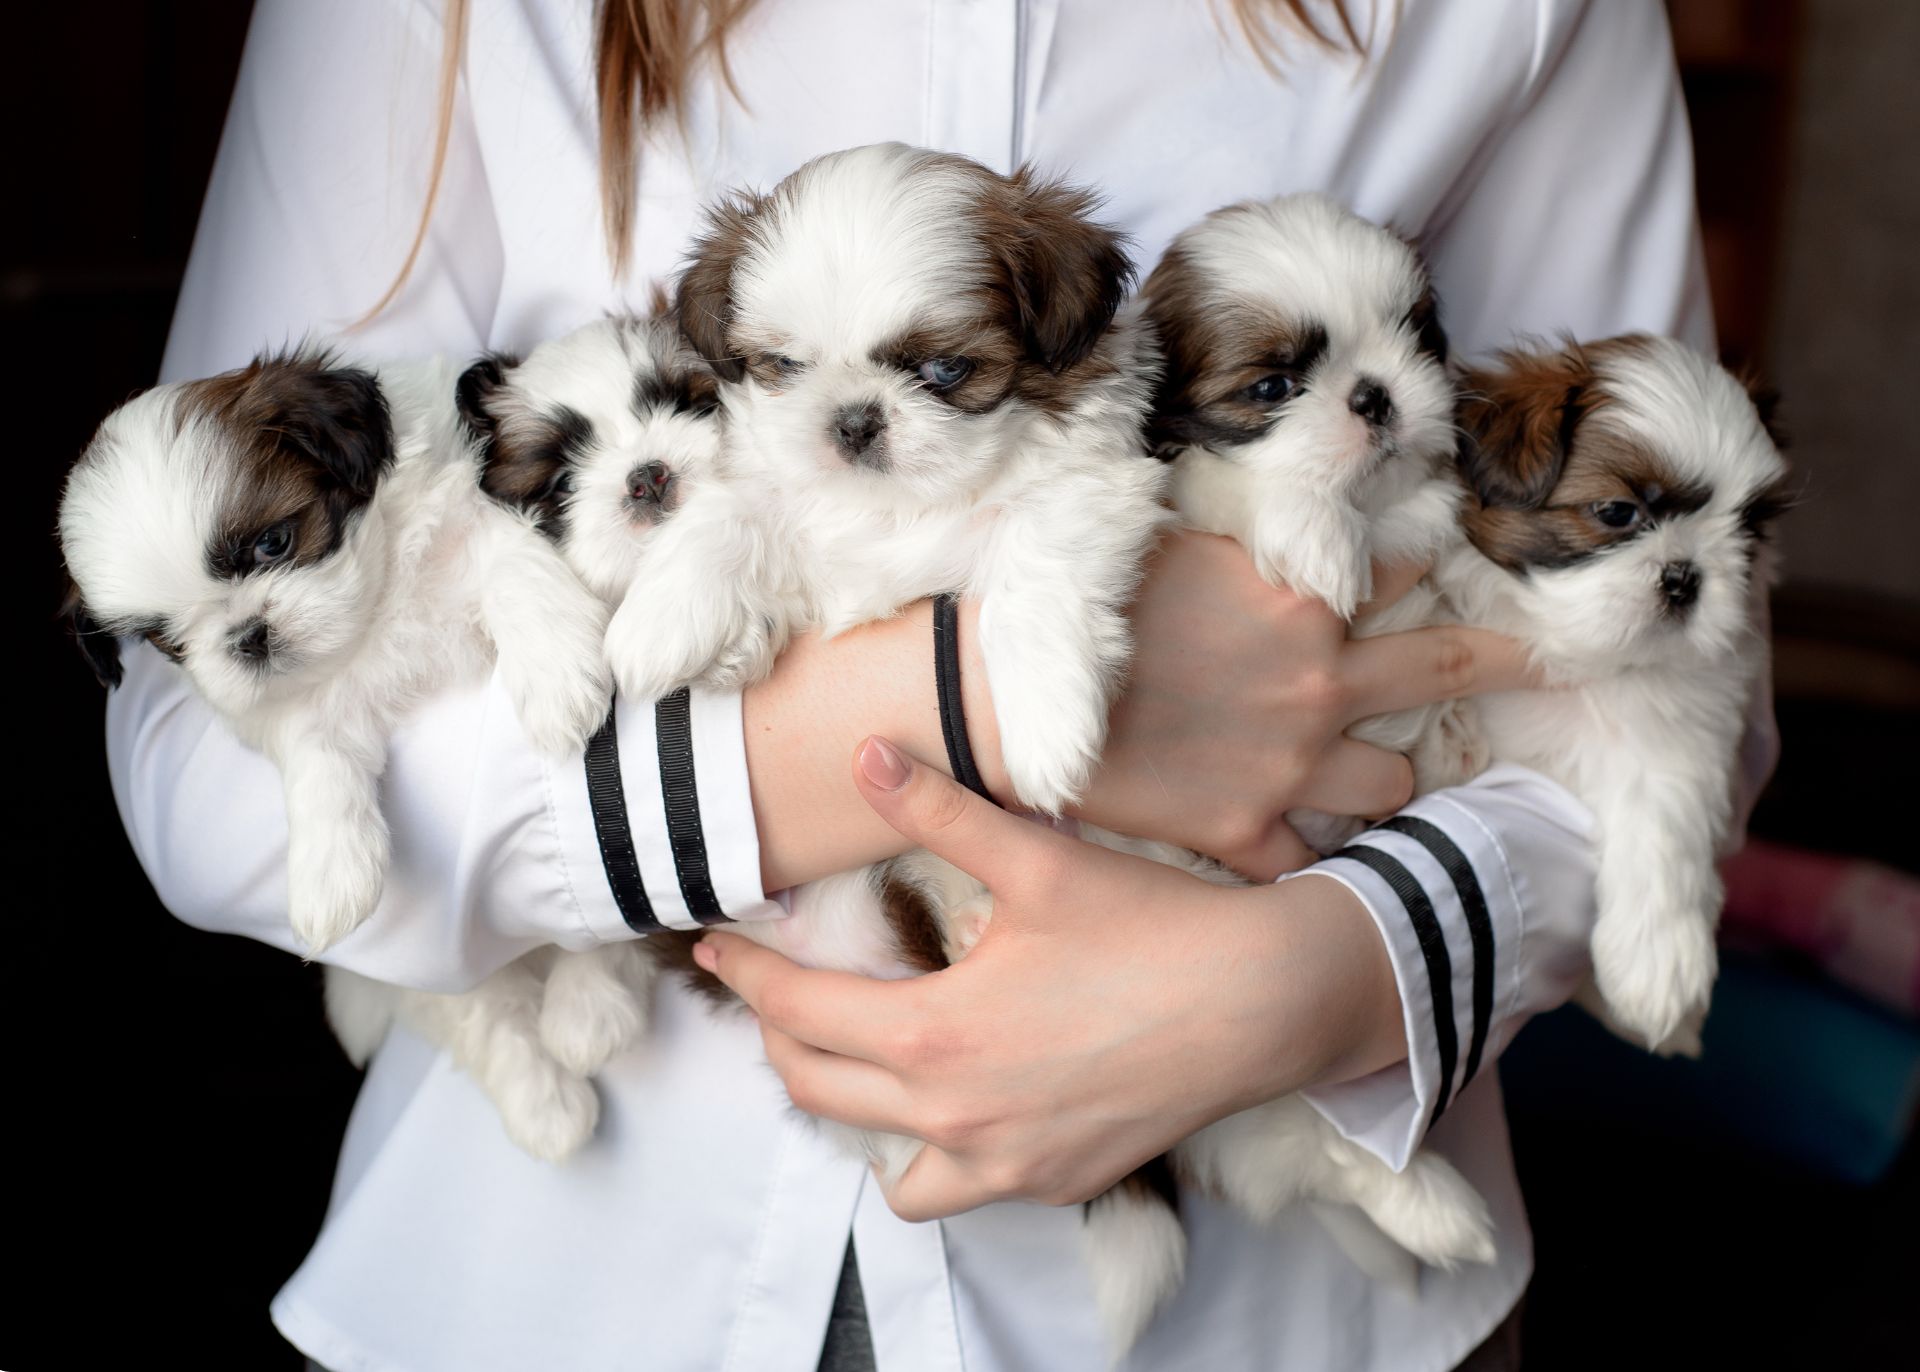 Torso of woman in white sweater with black trim at wrists holding five brown and white puppies.